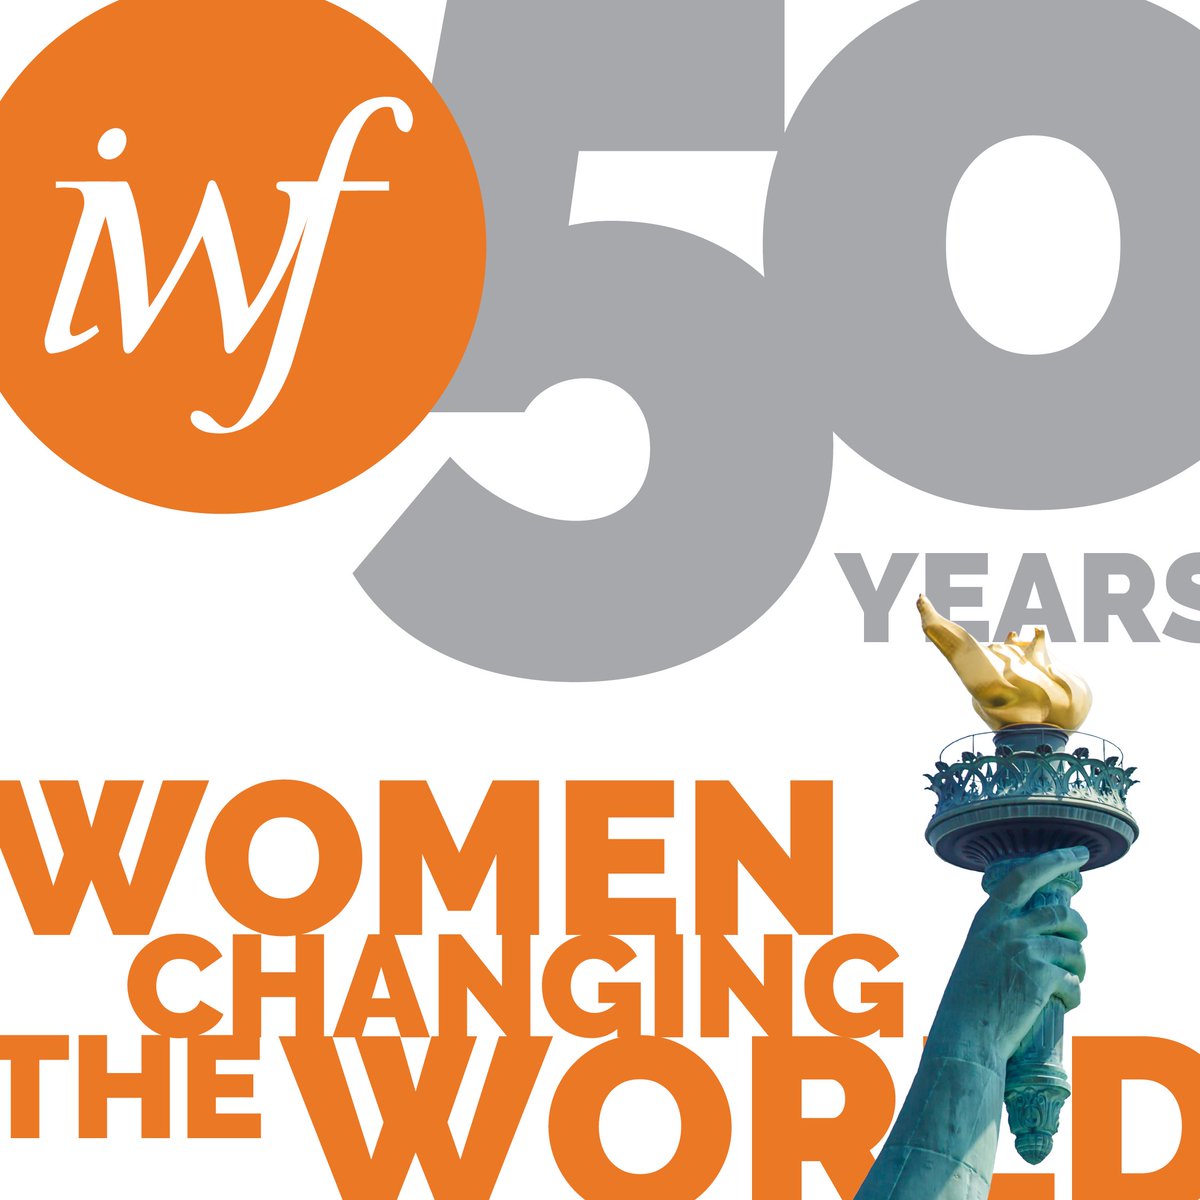 Excited to be joining the @IWFglobal World Leadership Conference tomorrow to discuss, 'Corporate Governance: Women Changing the World of Work' with a highly esteemed panel. I’m thrilled to speak to women leaders from around the world who are shaping the narrative and driving